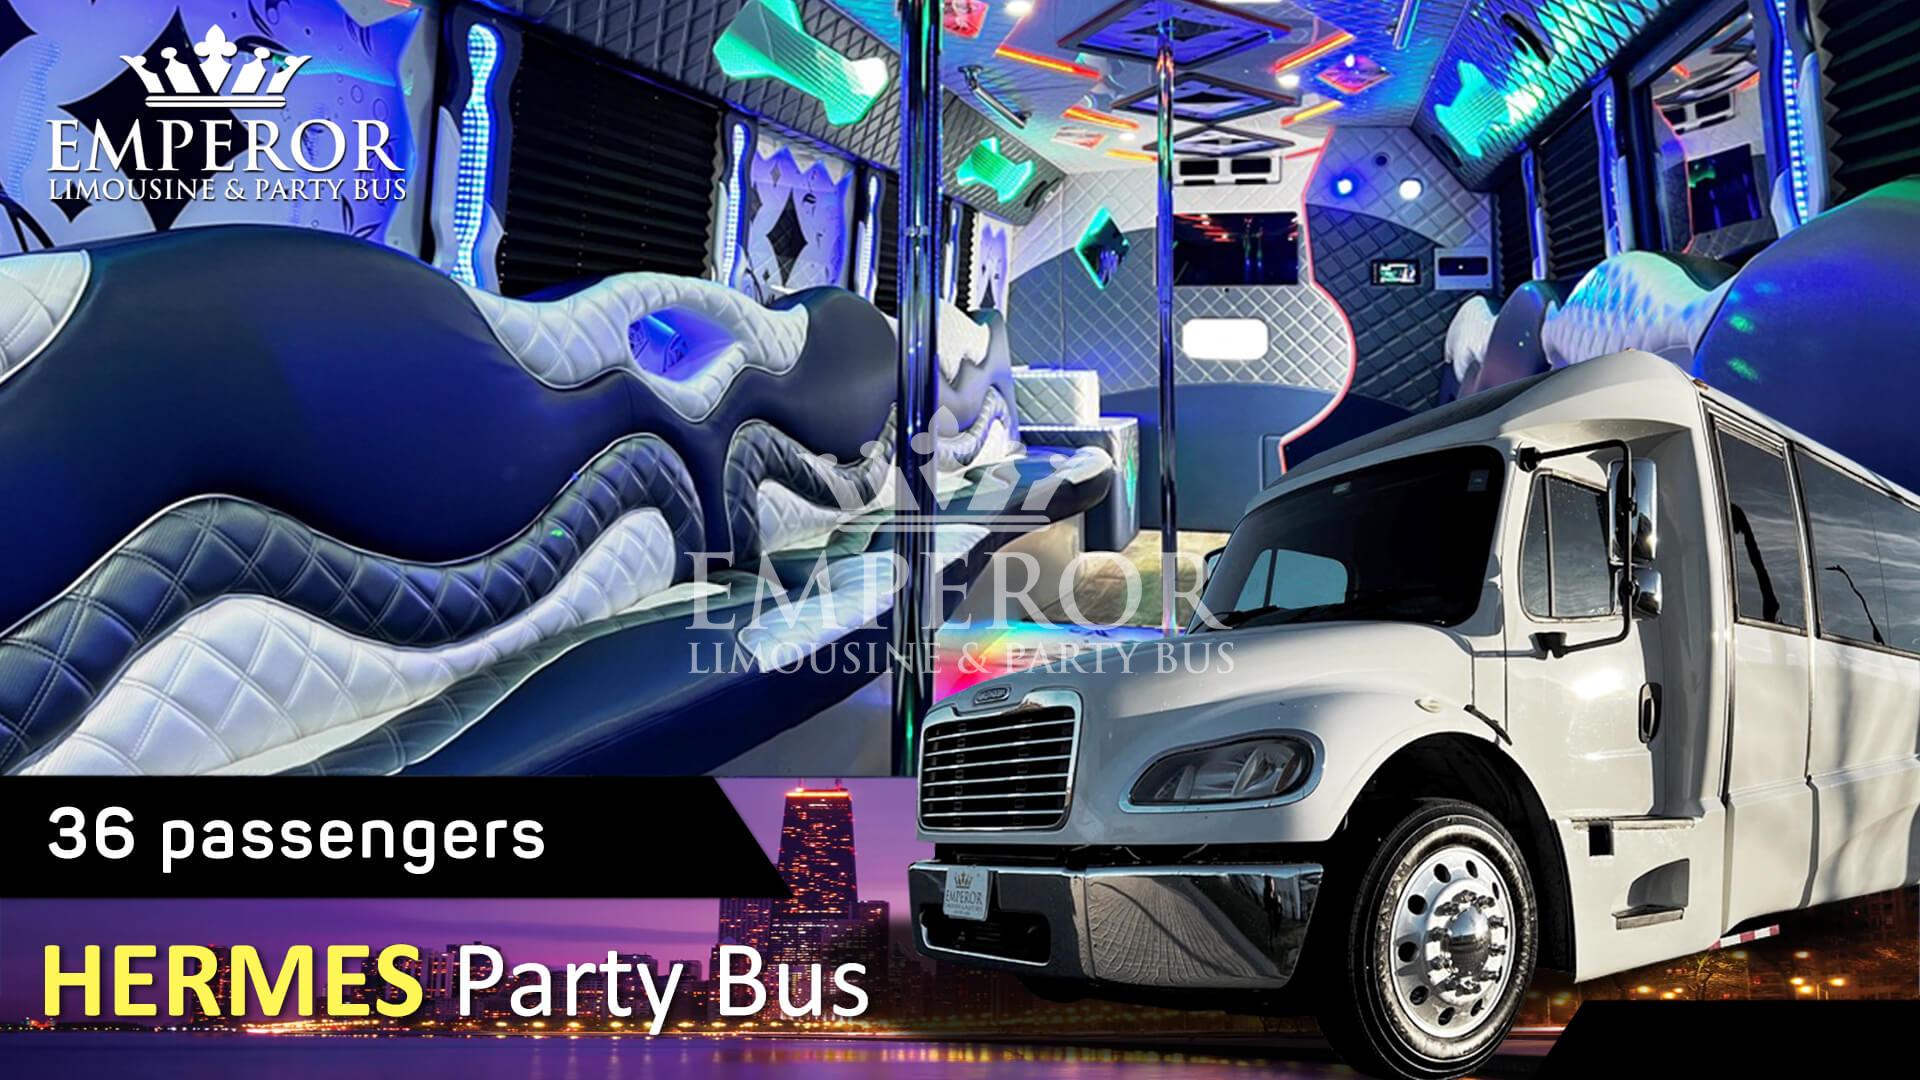 Party bus rental in Bradley, IL - Hermes Edition